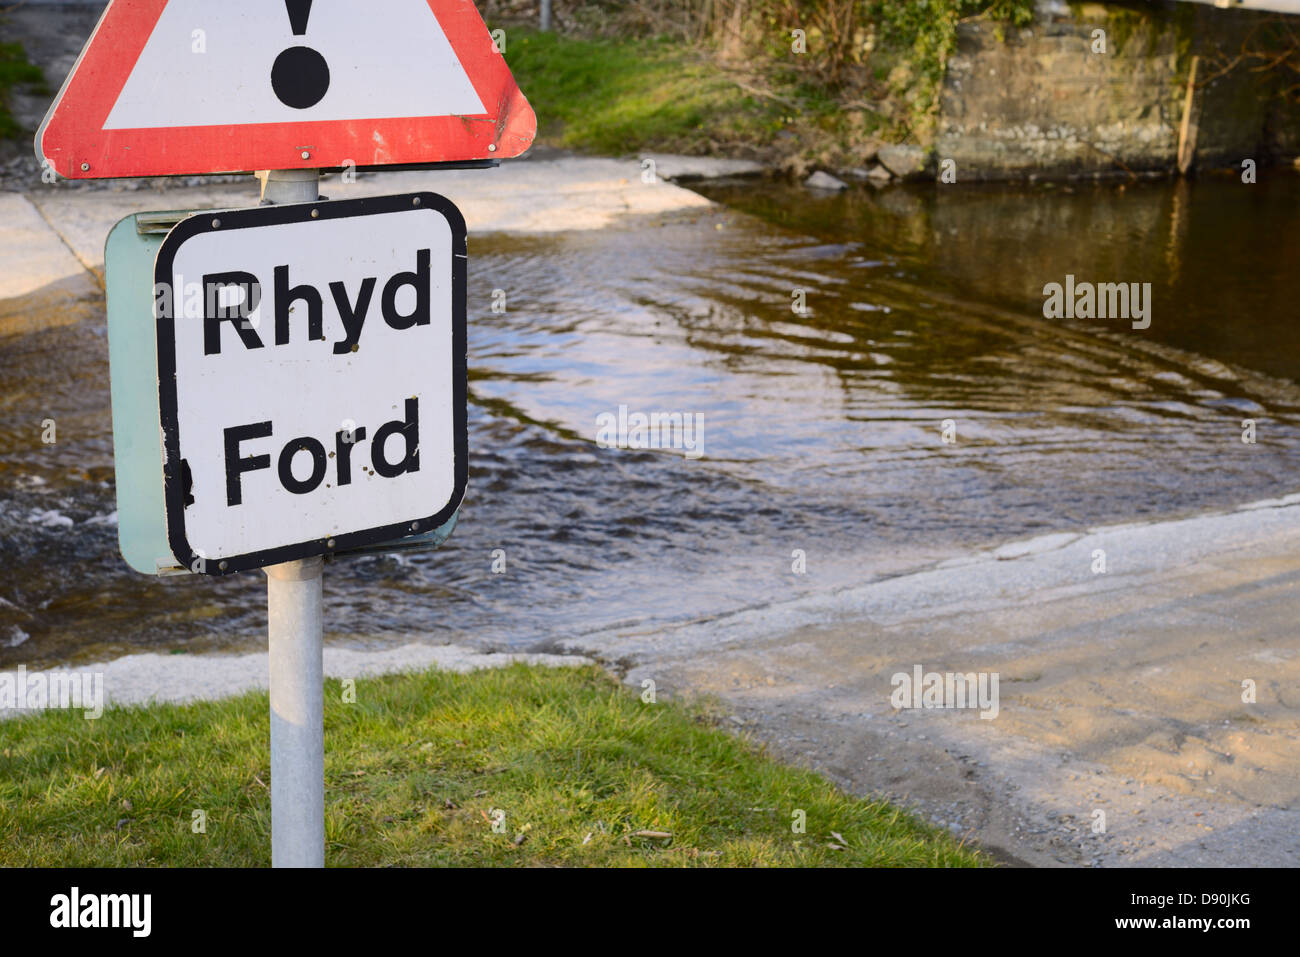 Bilingual sign in Welsh and English warning of a river crossing or ford, Llanrhystud, Wales, UK Stock Photo